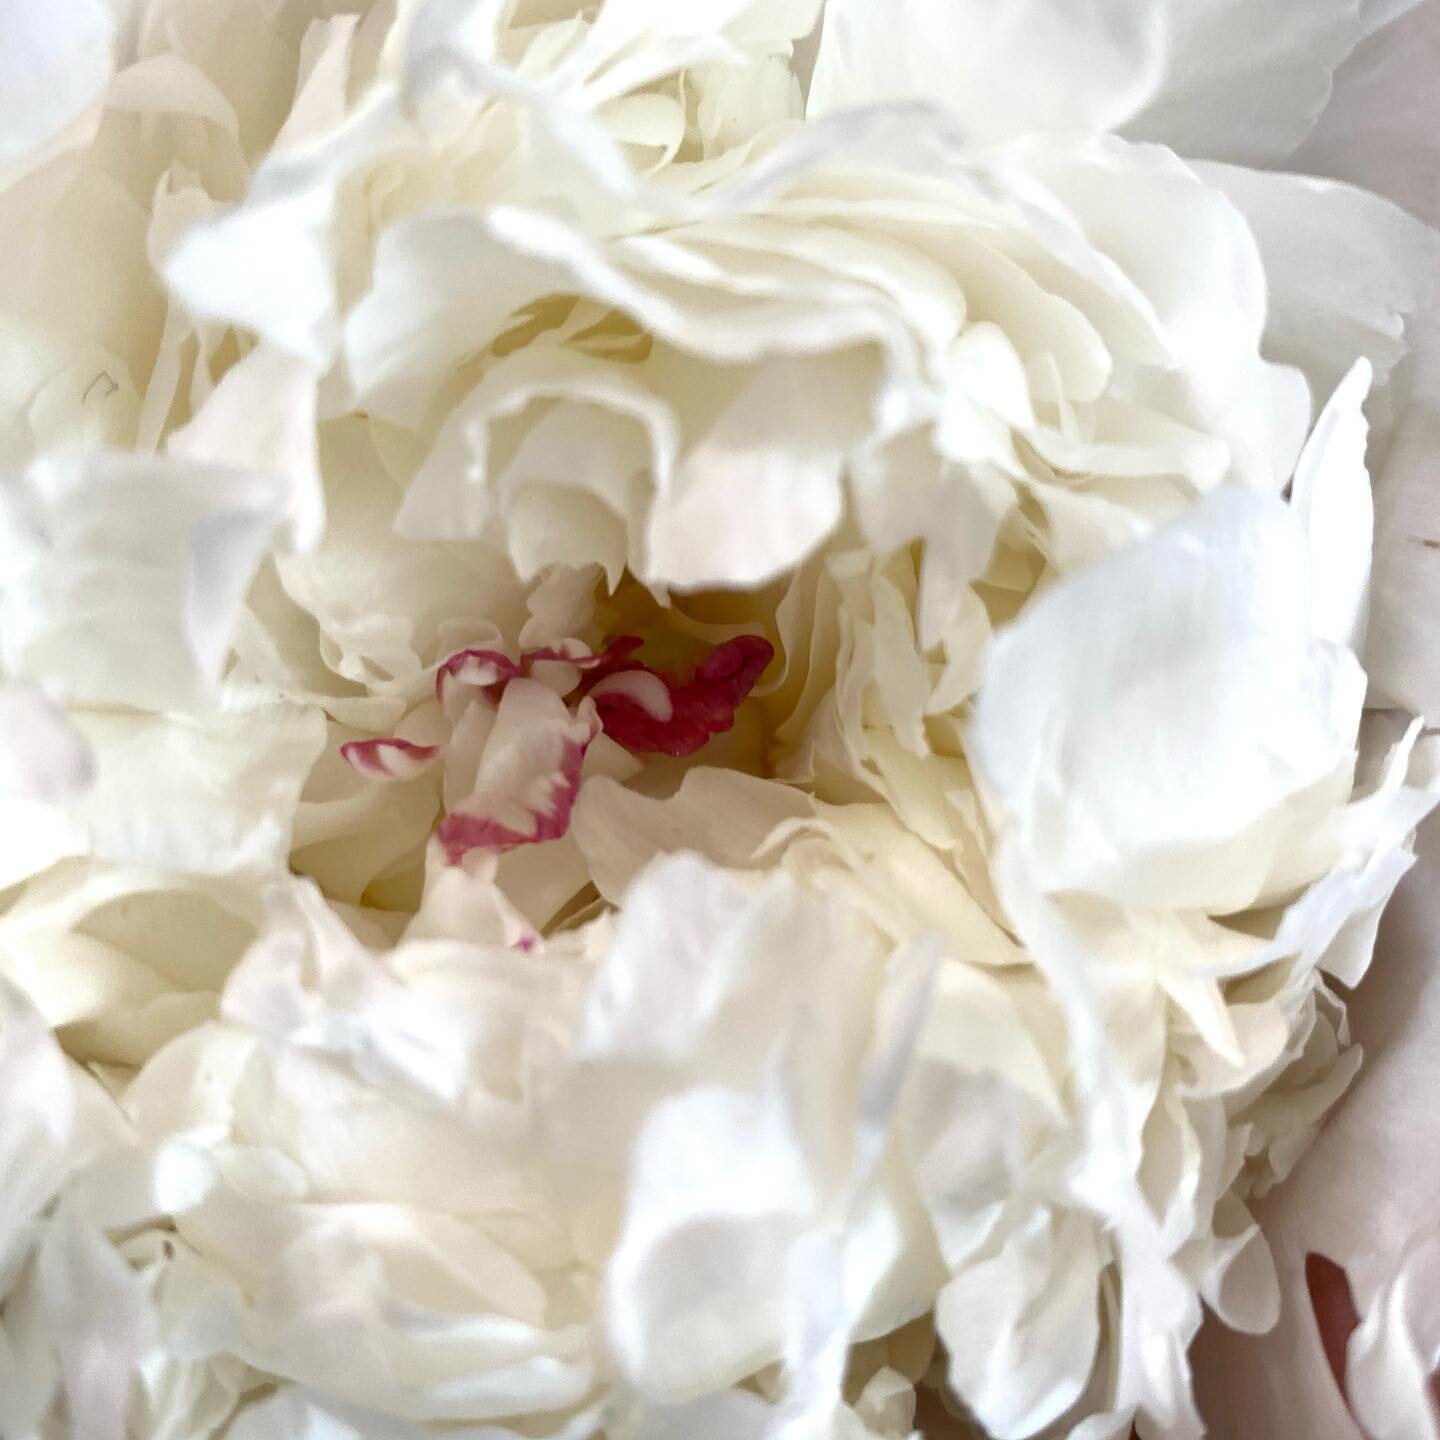 Oh these peonies! Fluffy ruffles of crunchy white with a little splash of wine.  I want to eat them!  #floralpreservation #preservedbridalbouquet #flowerlovers #weddingkeepsake #socalbride #peonies